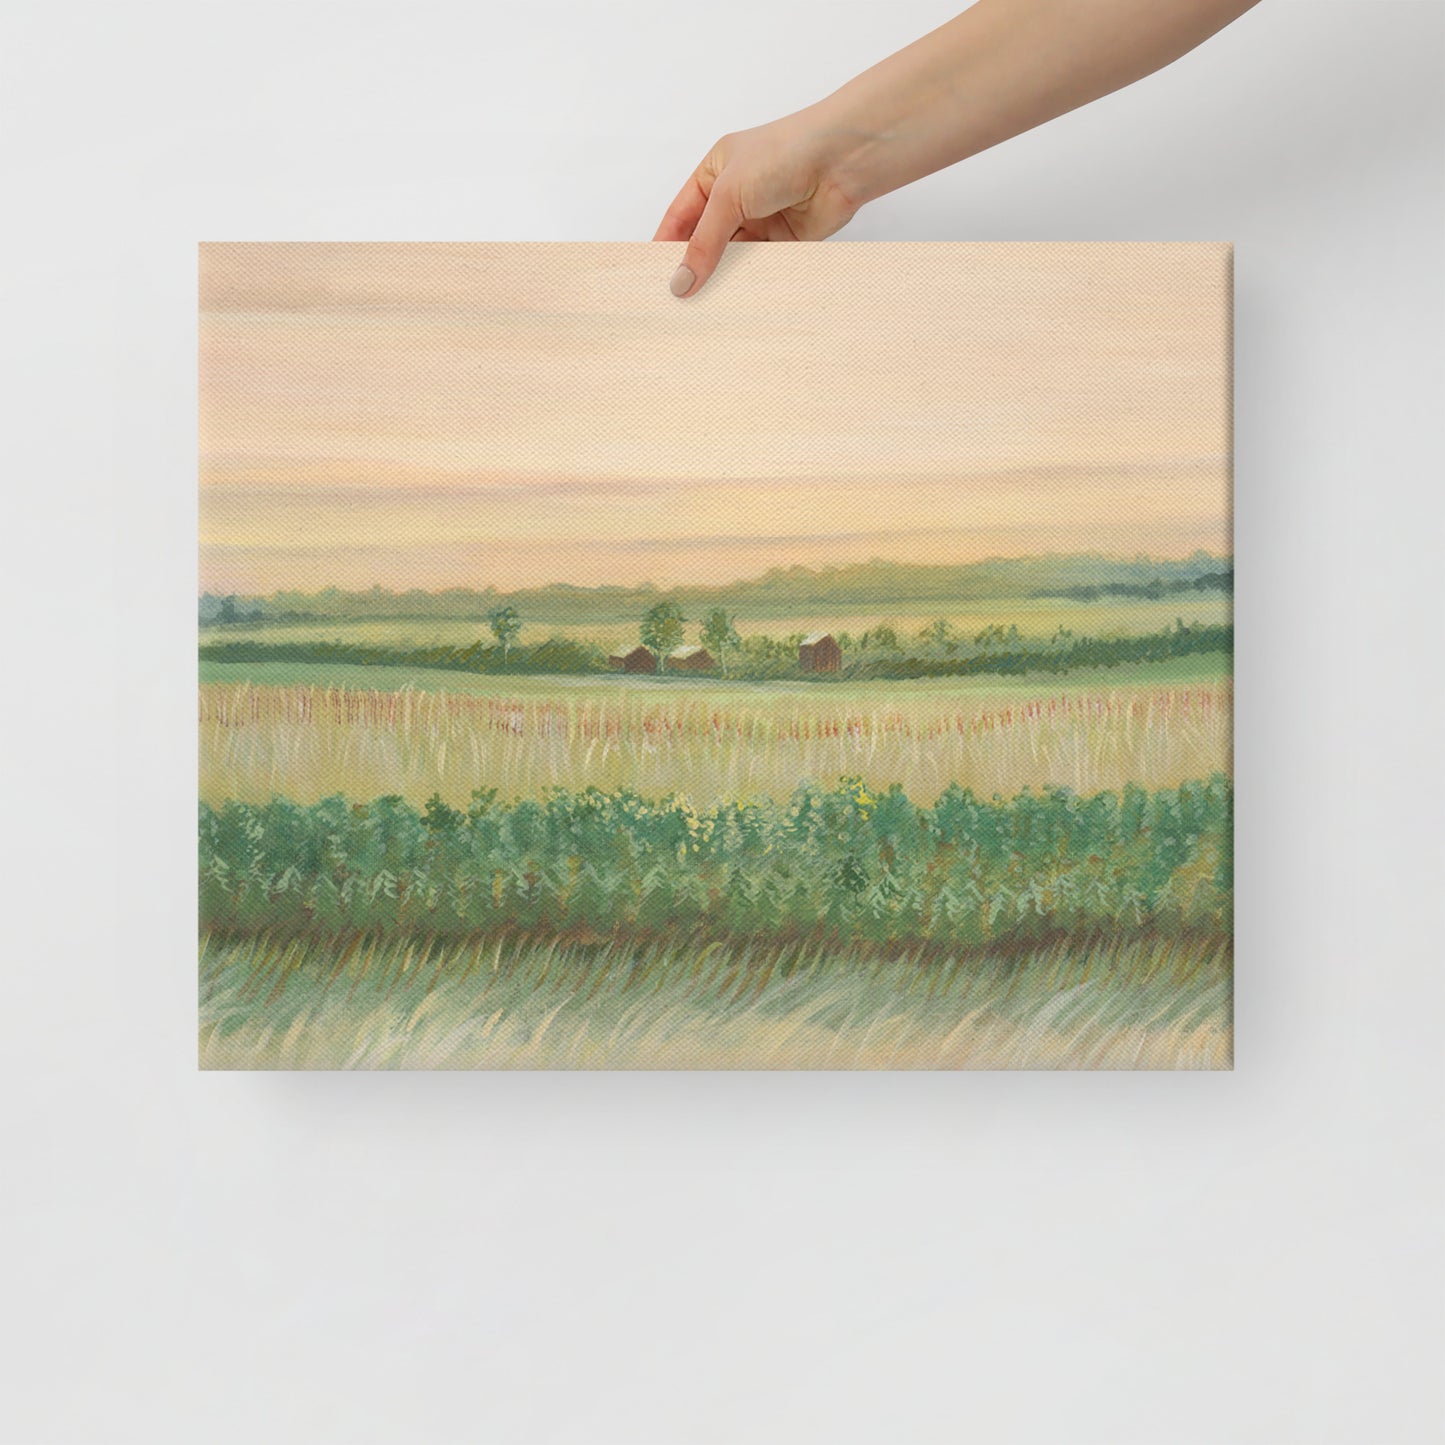 Weathered Landing's Field at Sunset Canvas Wall Art Print. Canvas art prints made in Canada and US. Beautiful in a farmhouse, country, or rustic home. Find a variety of home decor and canvas wall art prints at Weathered Landing. Located in Komoka, Ontario, local delivery is available. Shipping to Canada and the US.